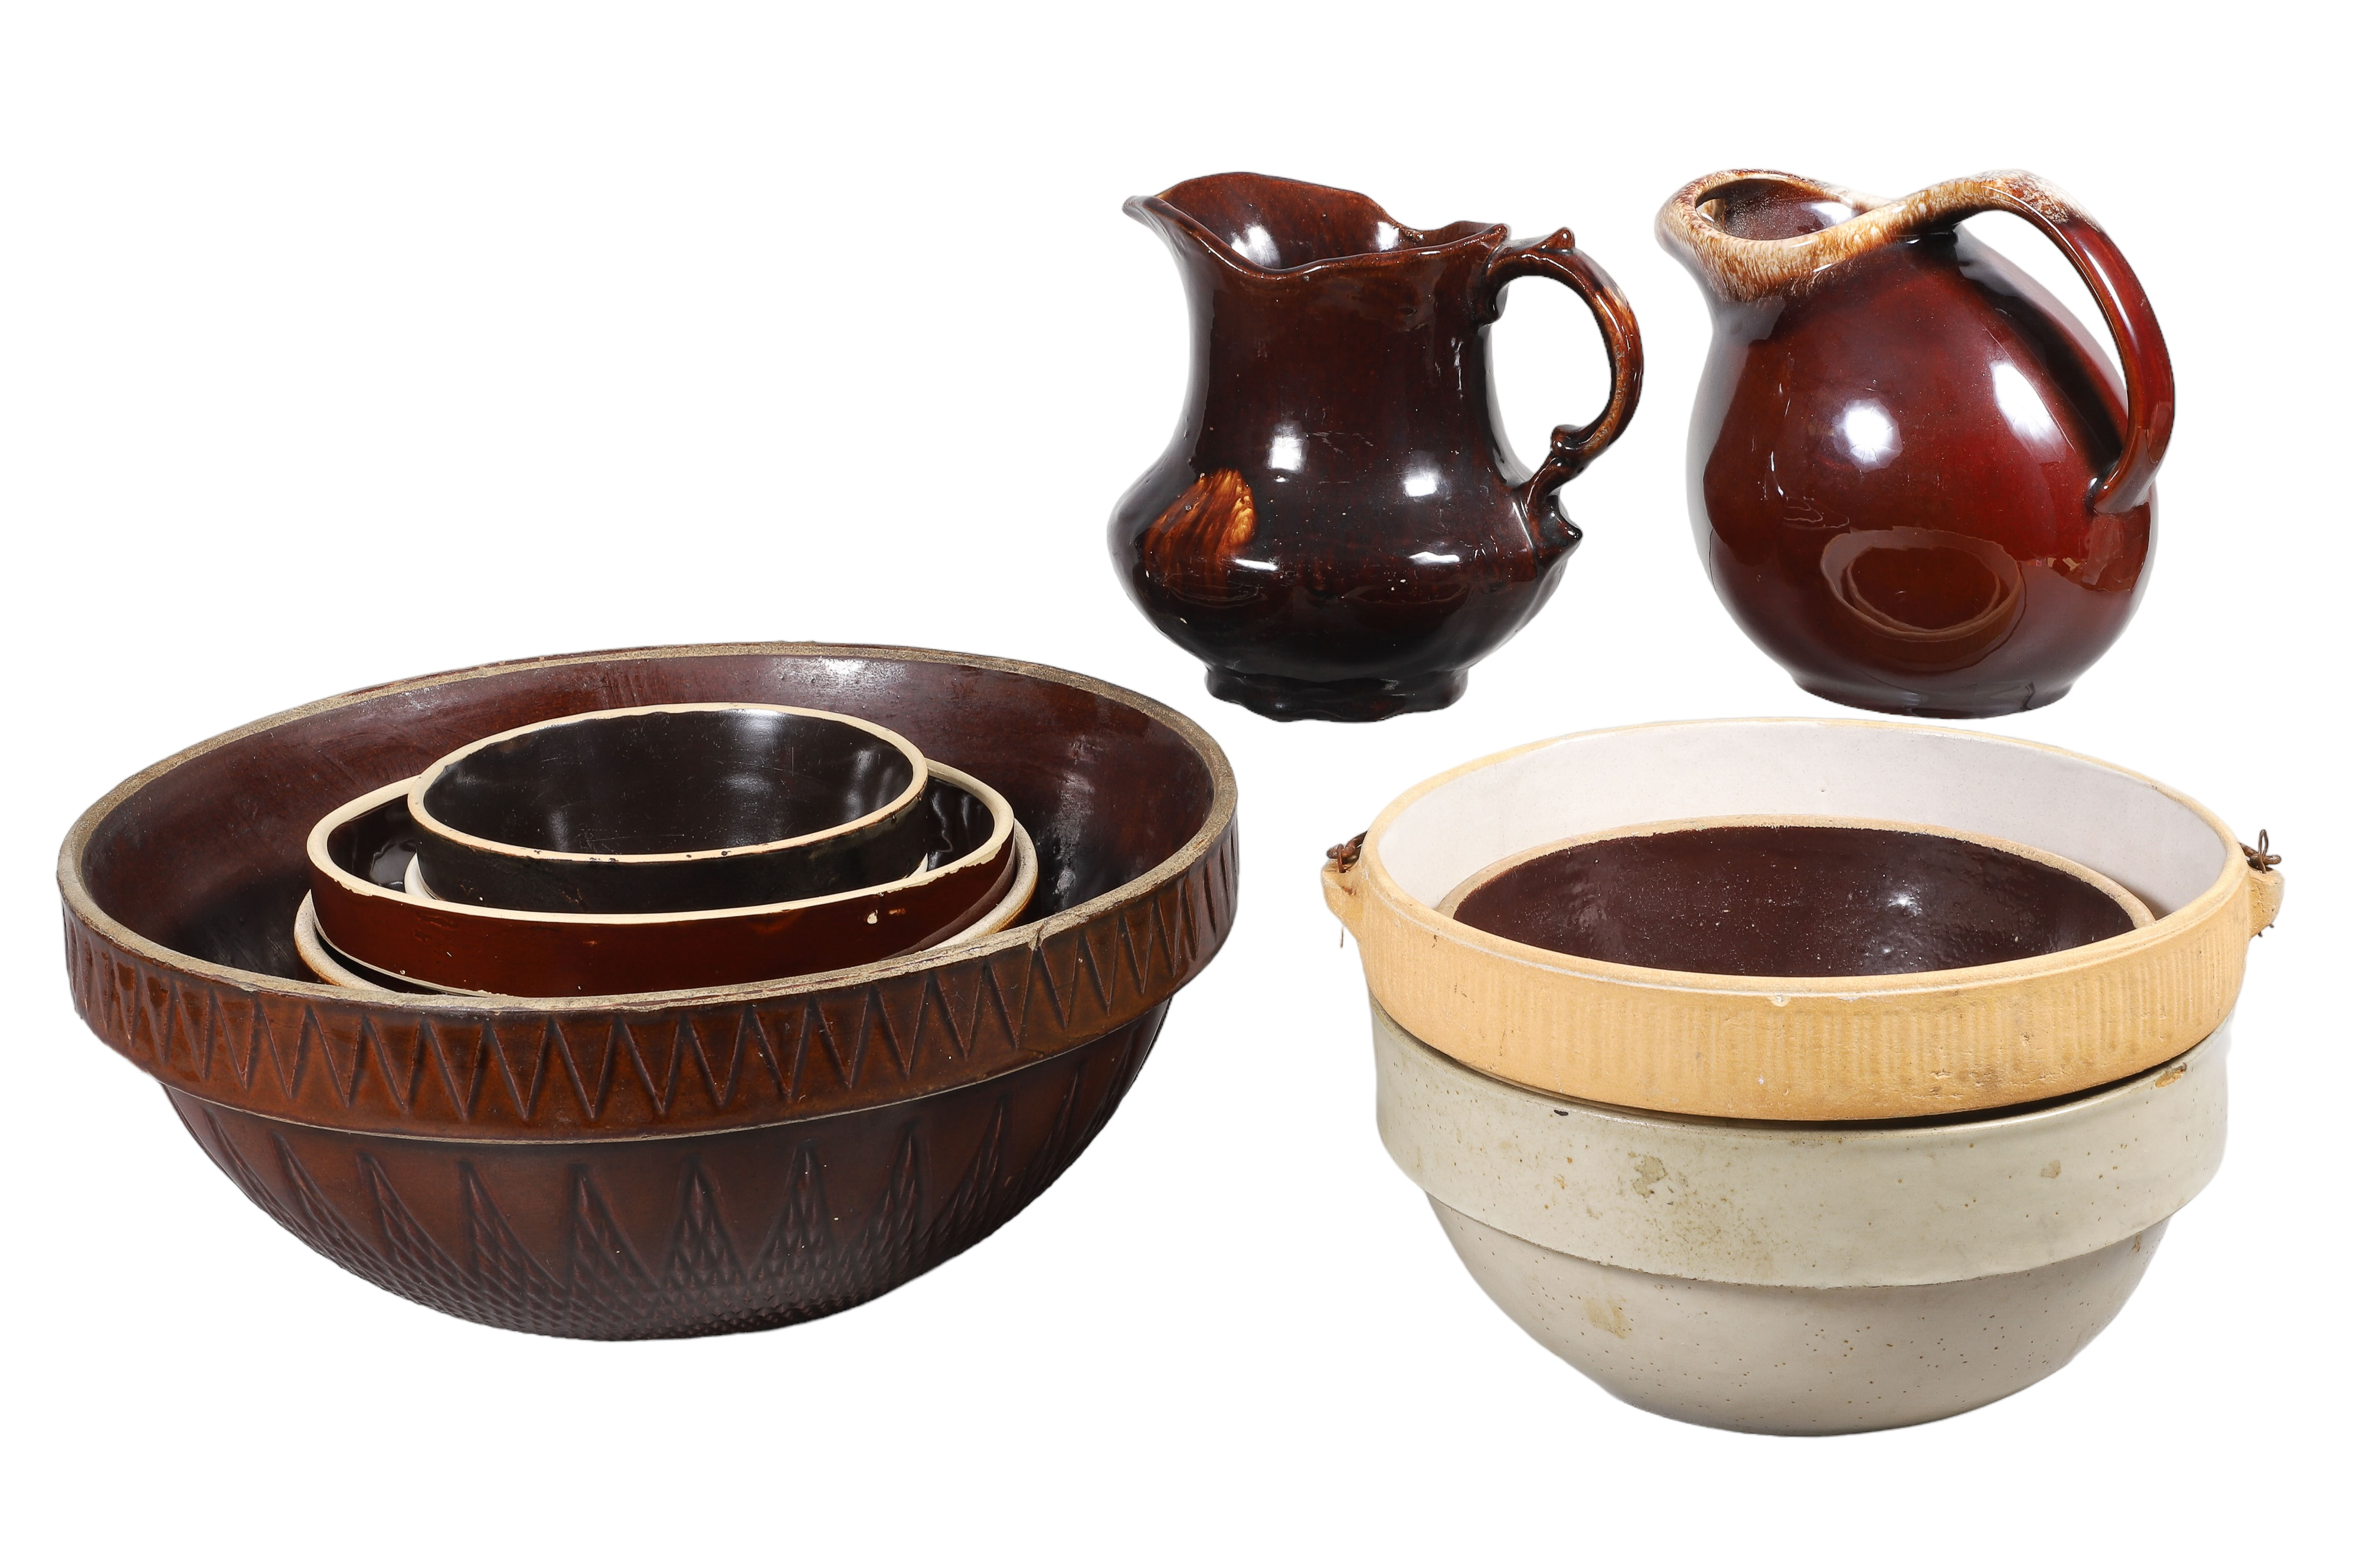 Brown and cream pottery mixing bowls